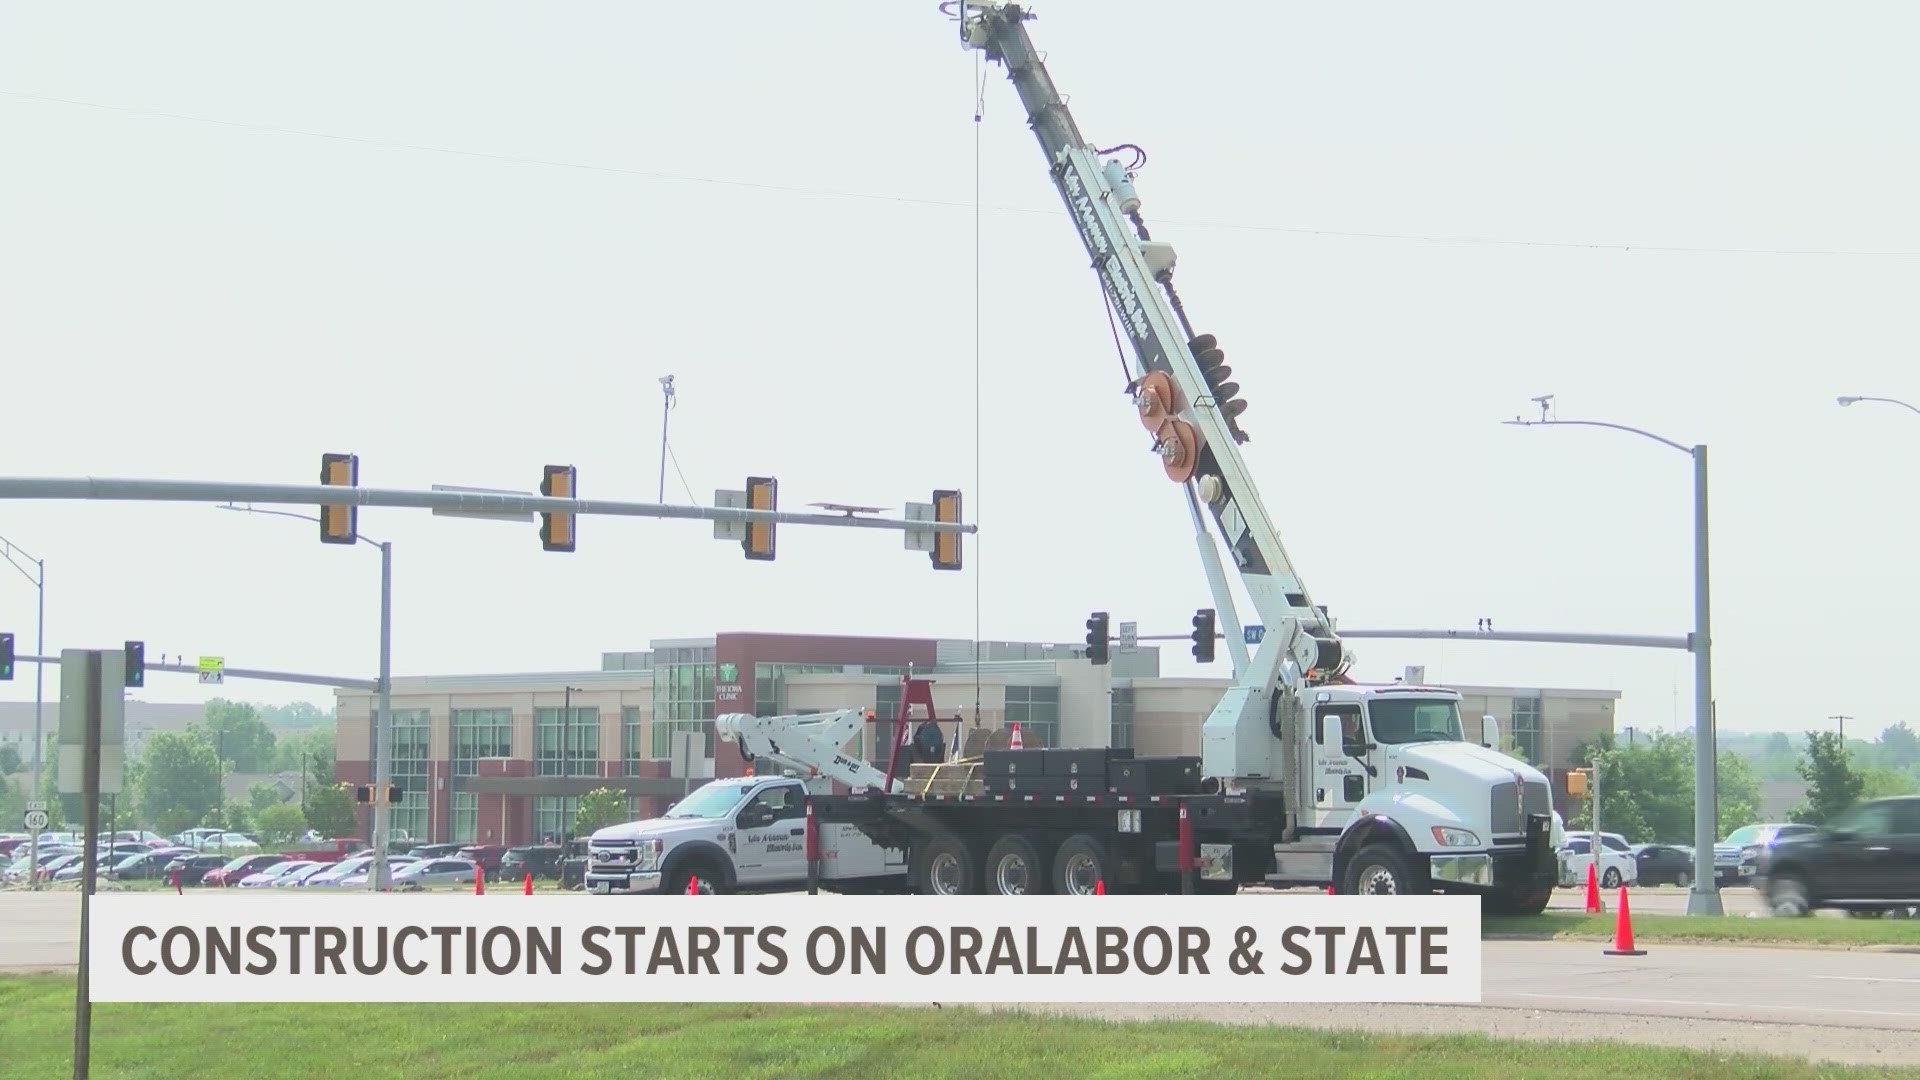 Officials say the work is necessary due to the city's population growth.